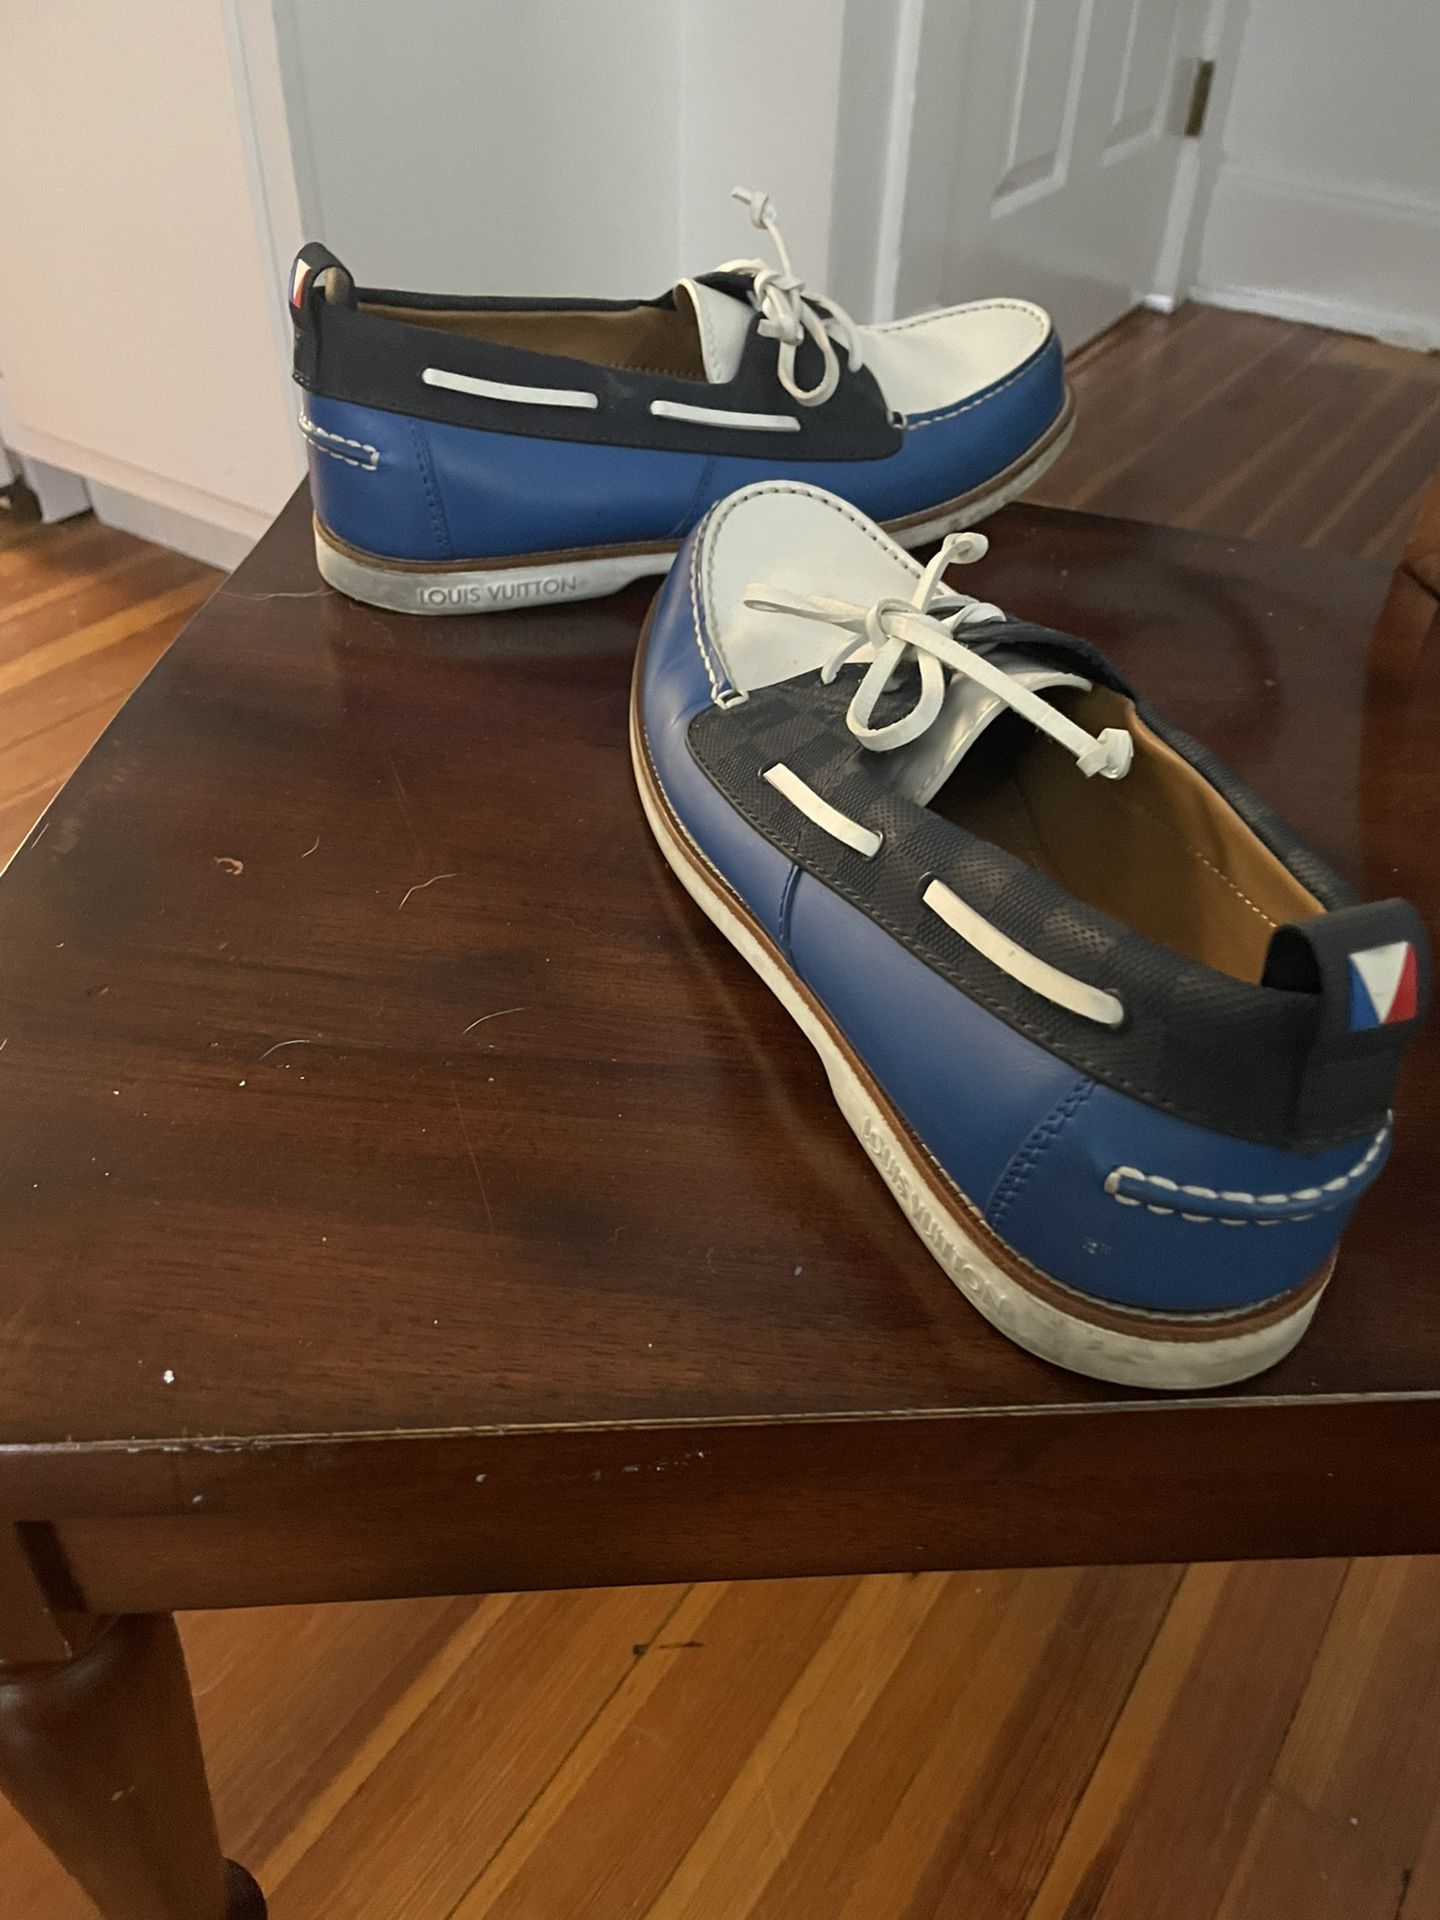 Louis Vuitton Boat Shoes for Sale in New York, NY - OfferUp